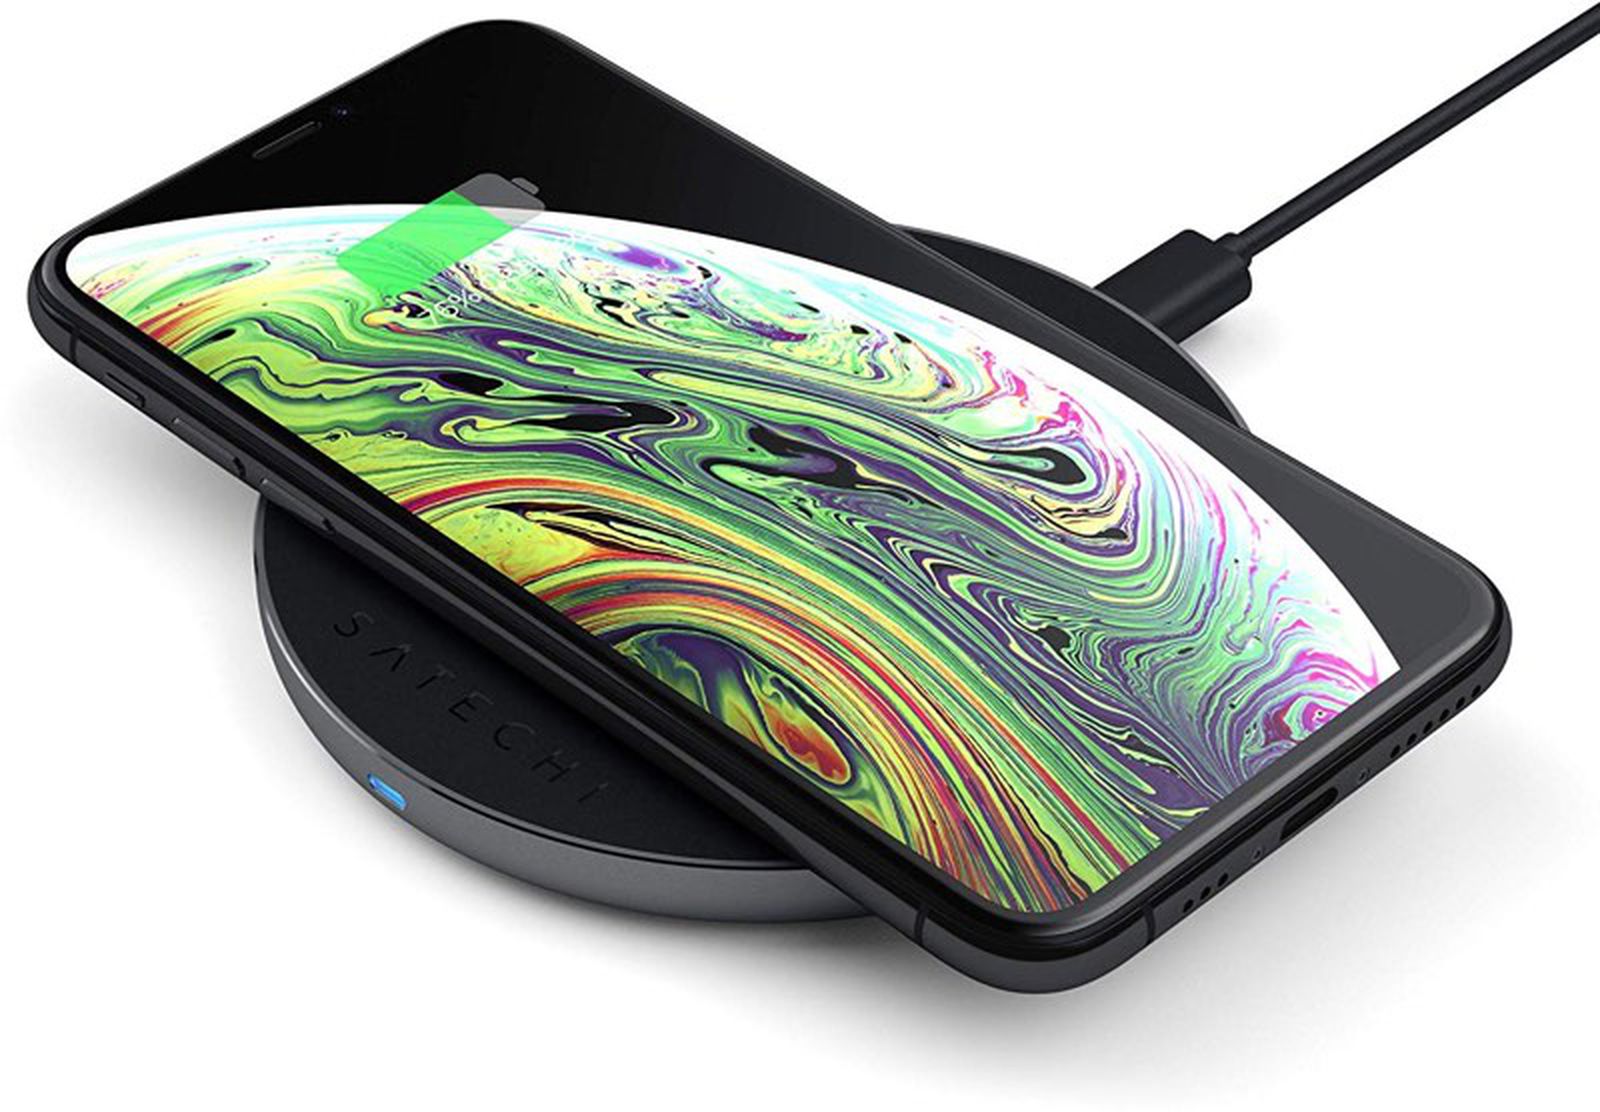 Satechi Launches New Usb C Wireless Charger For Qi Based Iphones Macrumors 0722